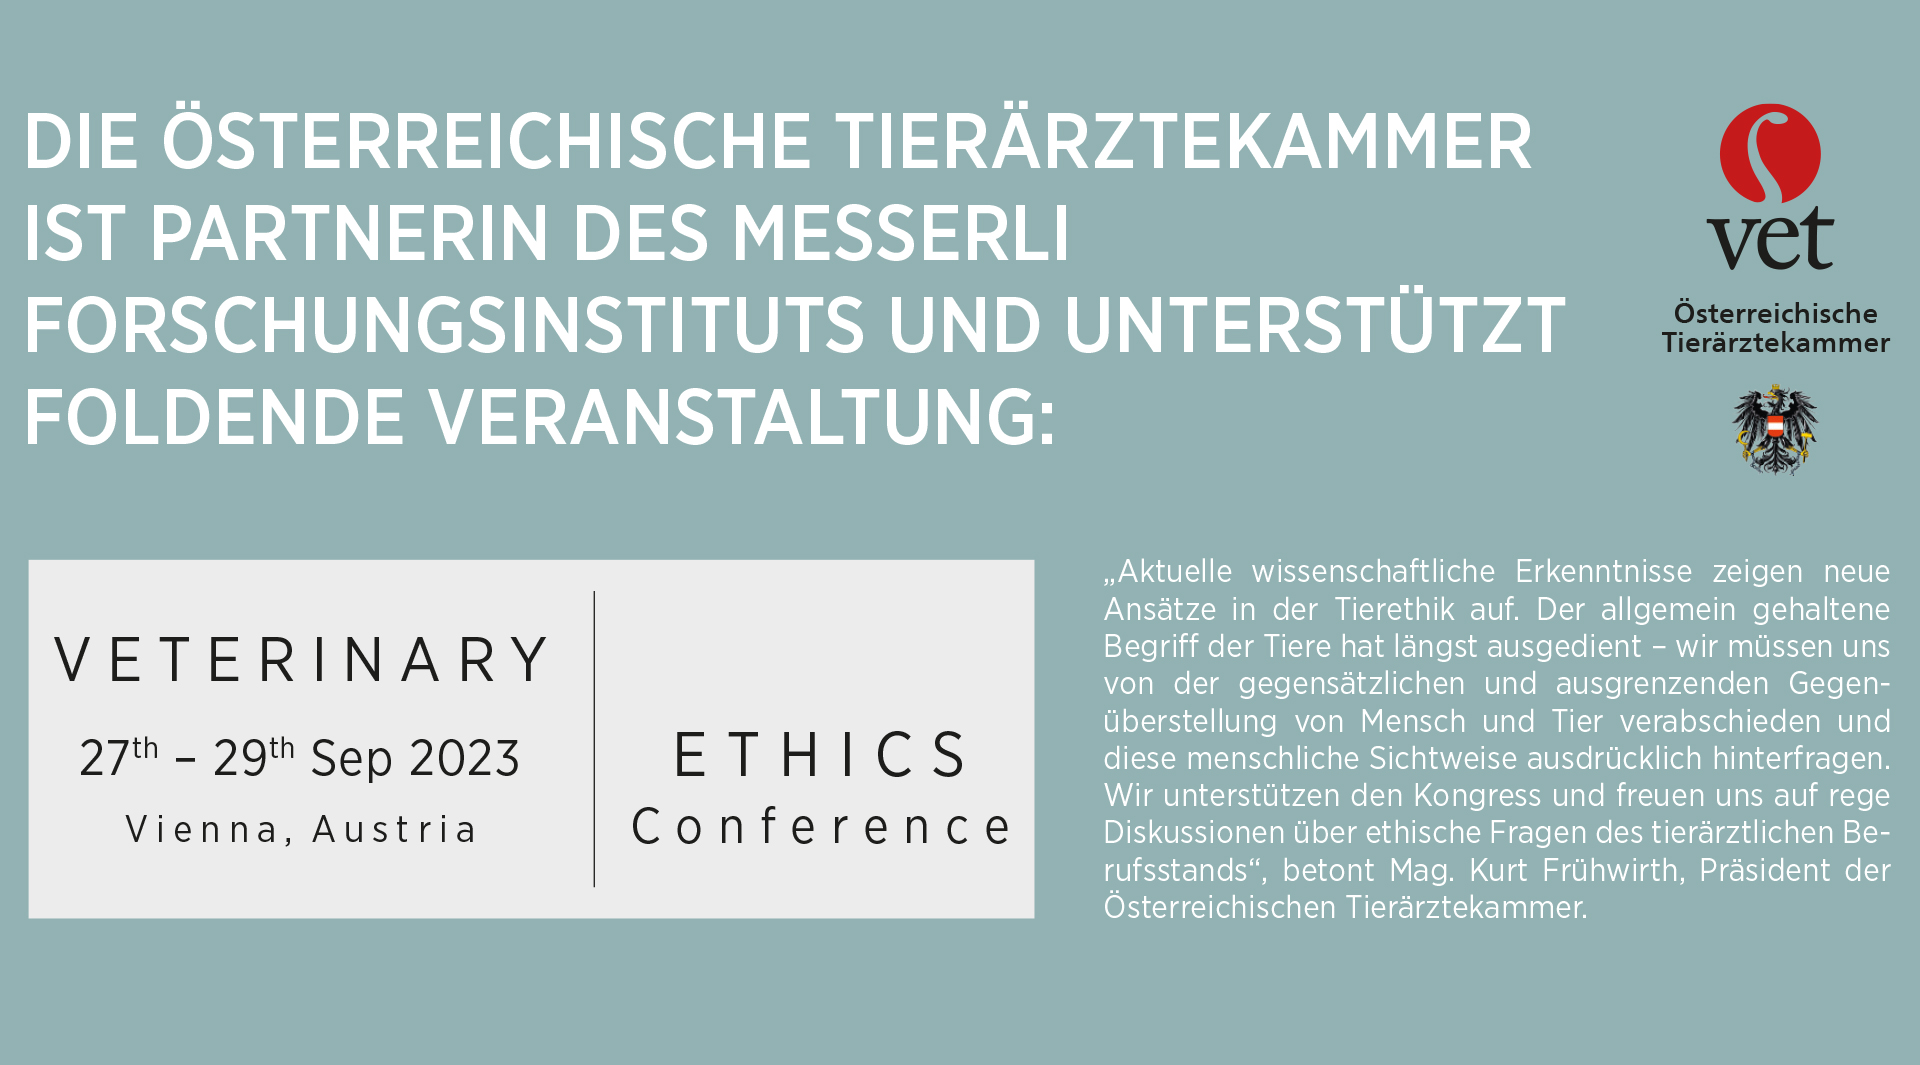 Veterinary Ethics Conference 2023